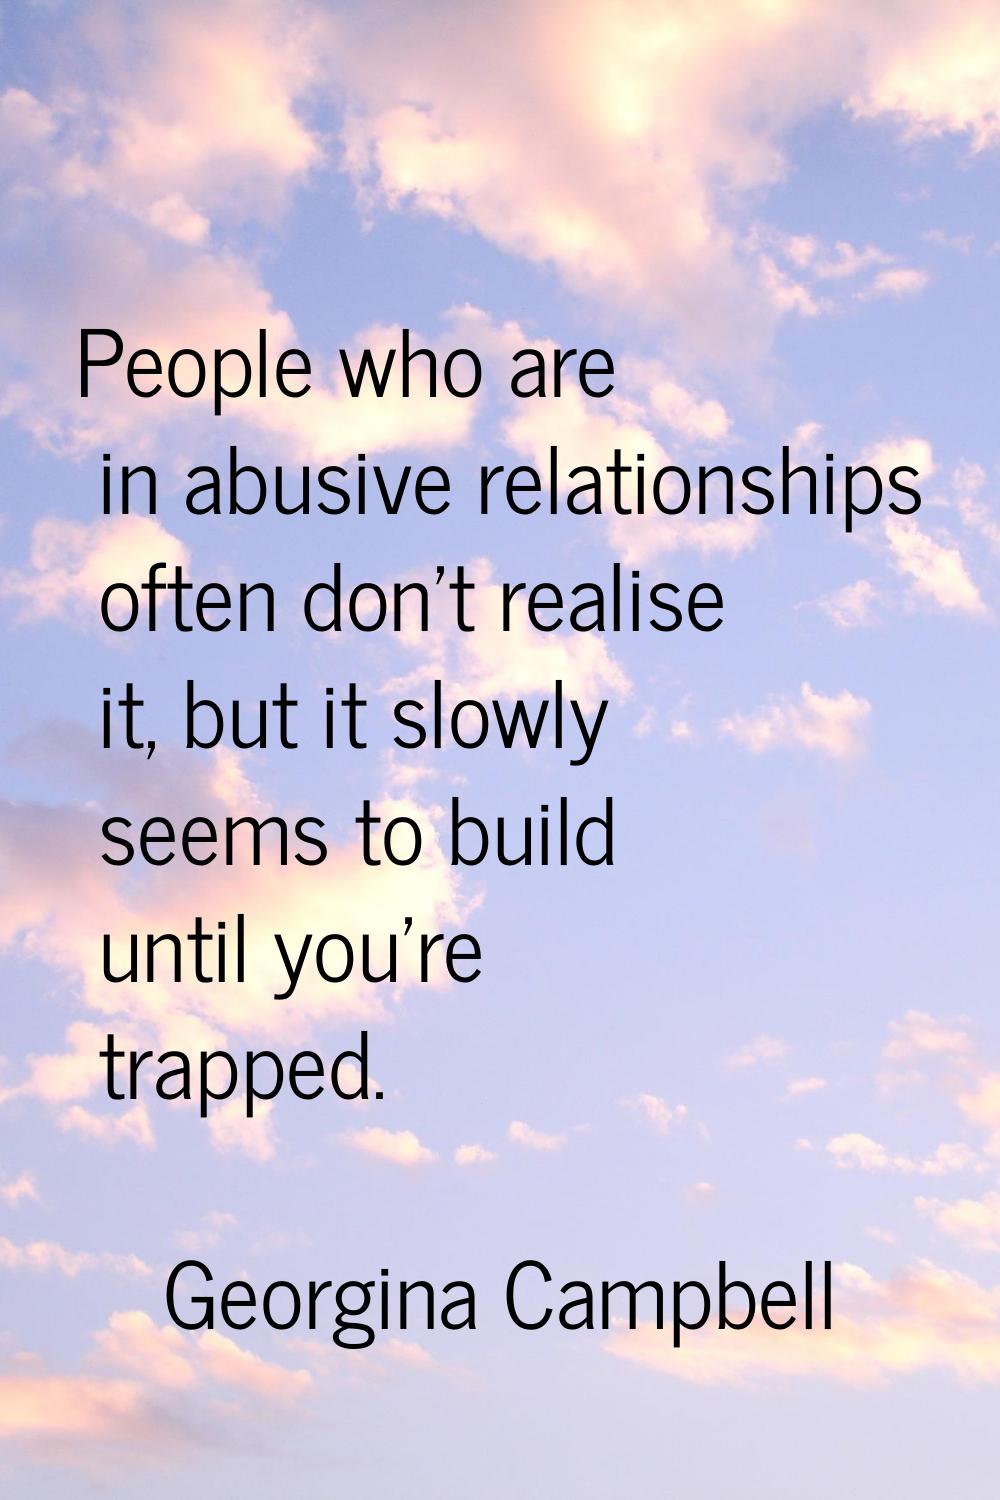 People who are in abusive relationships often don't realise it, but it slowly seems to build until 